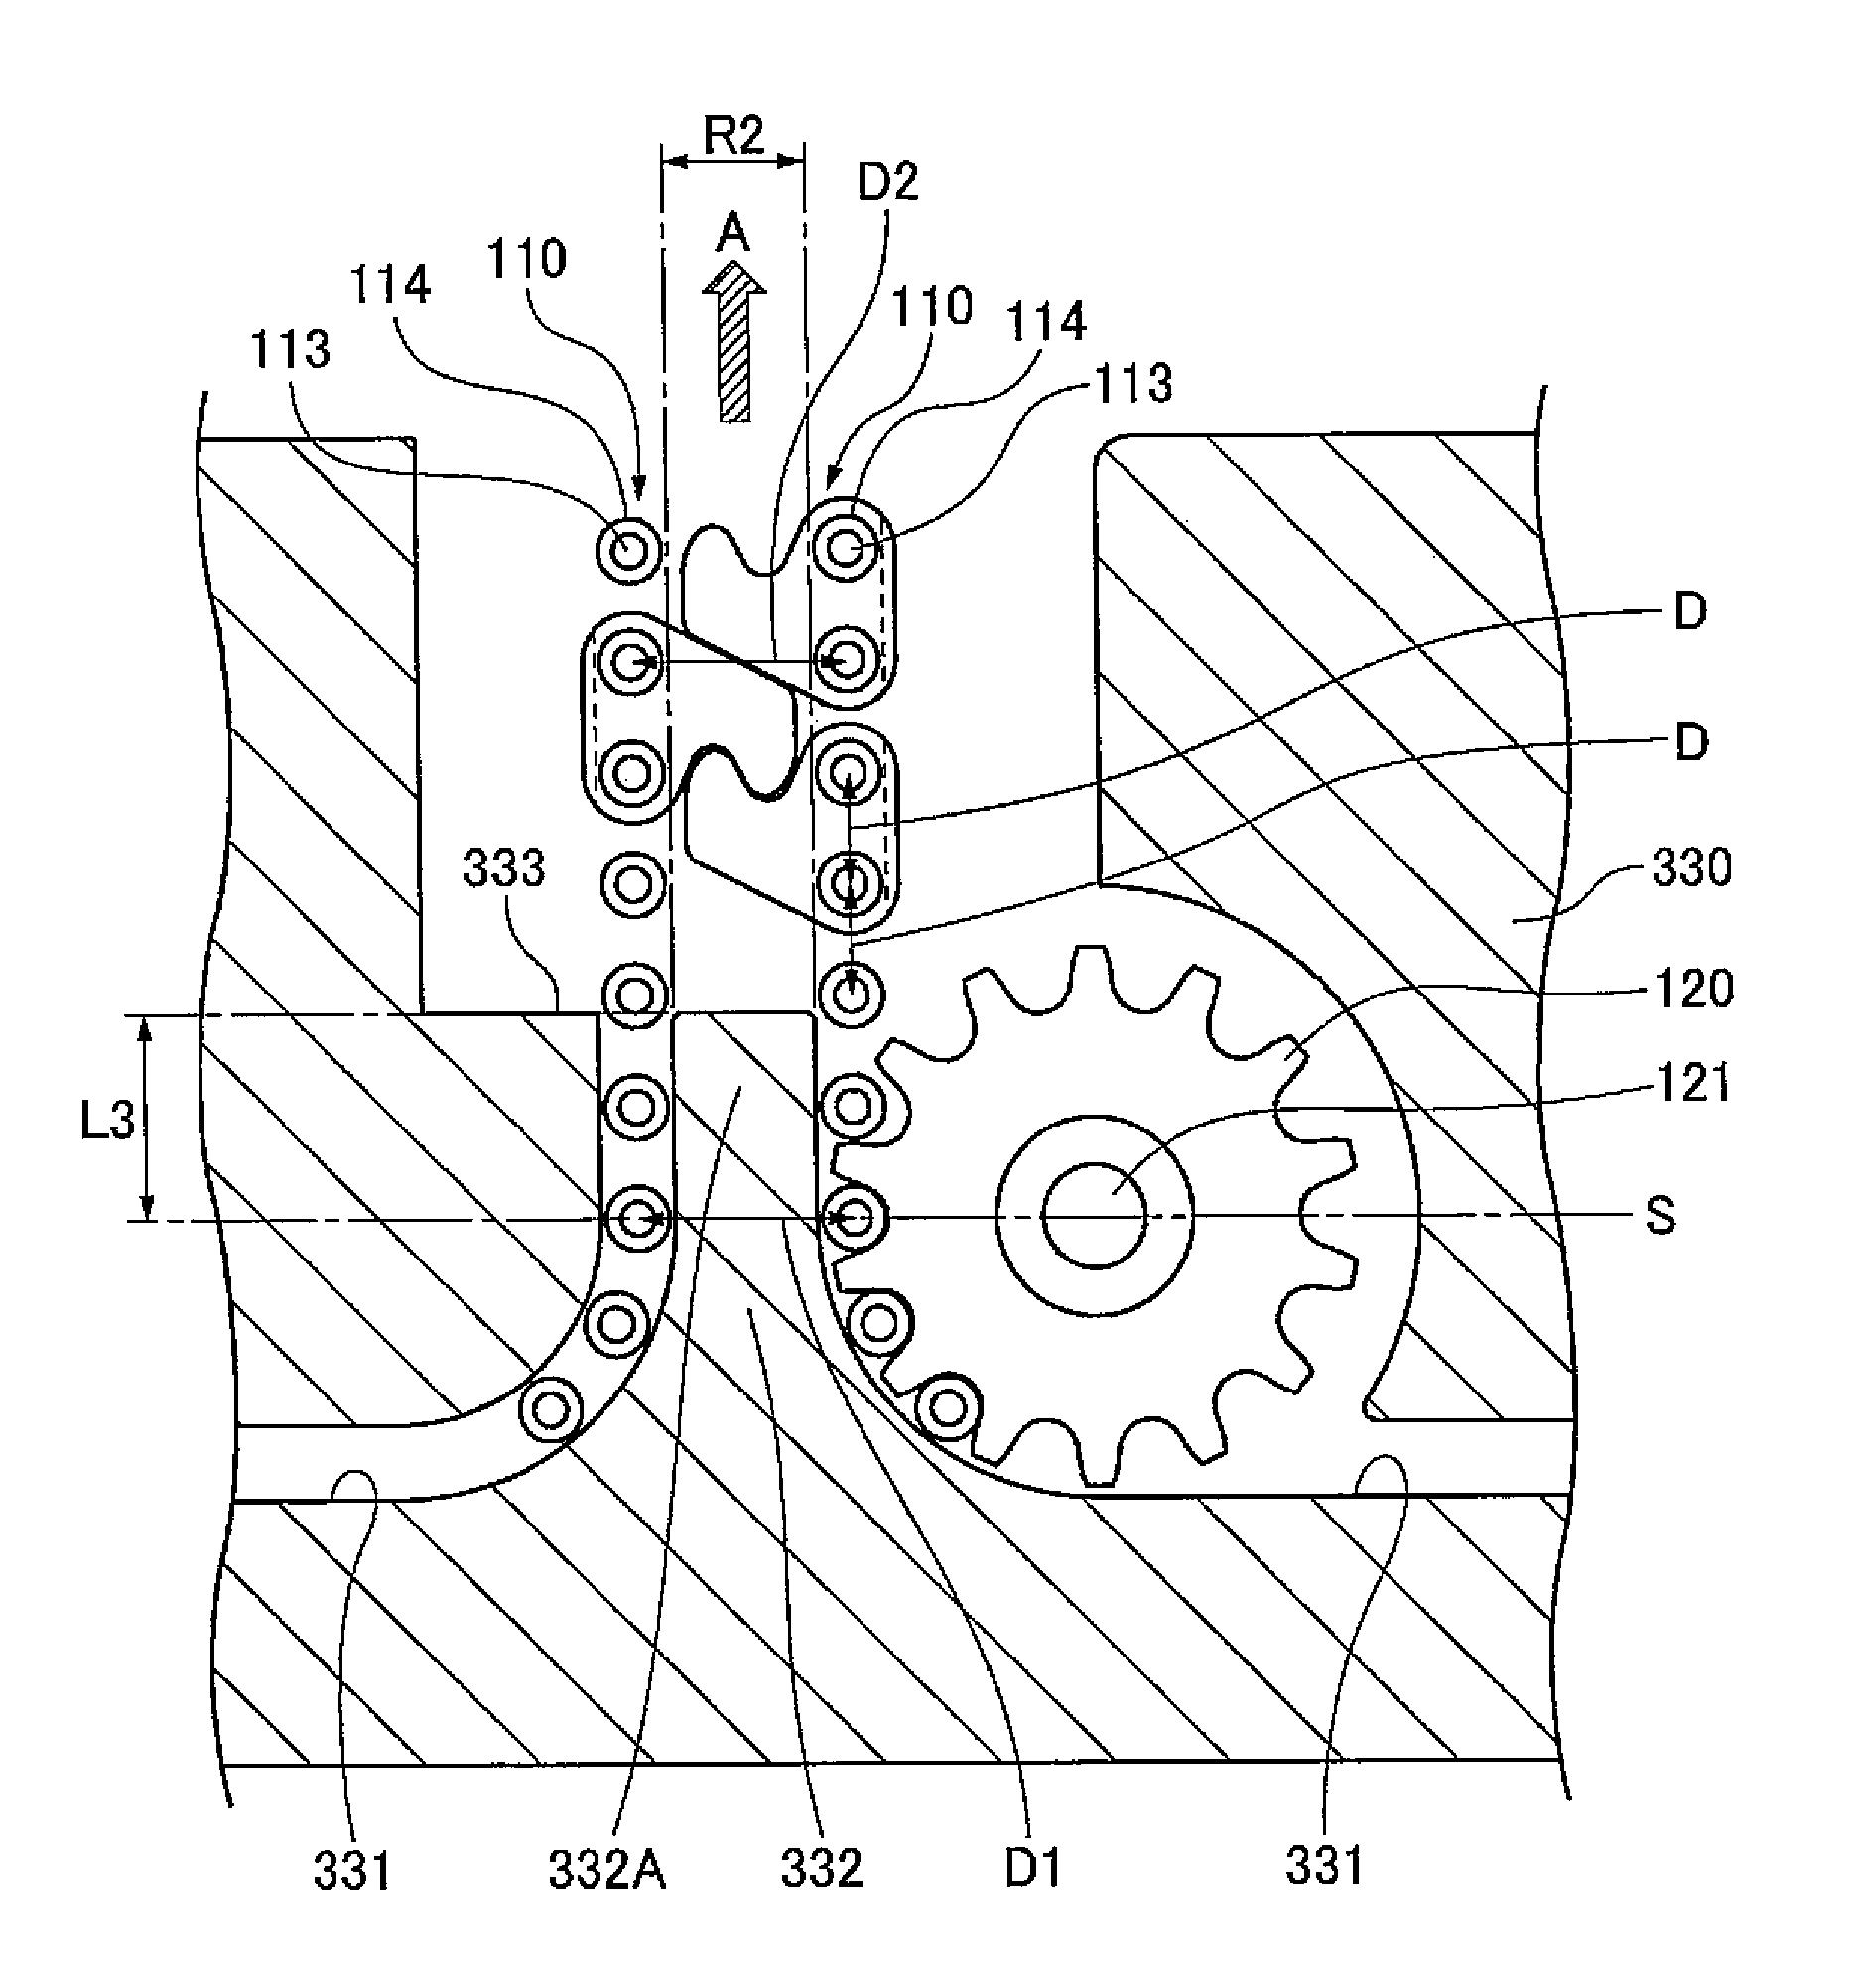 Advancing/retracting actuation device with meshing chain